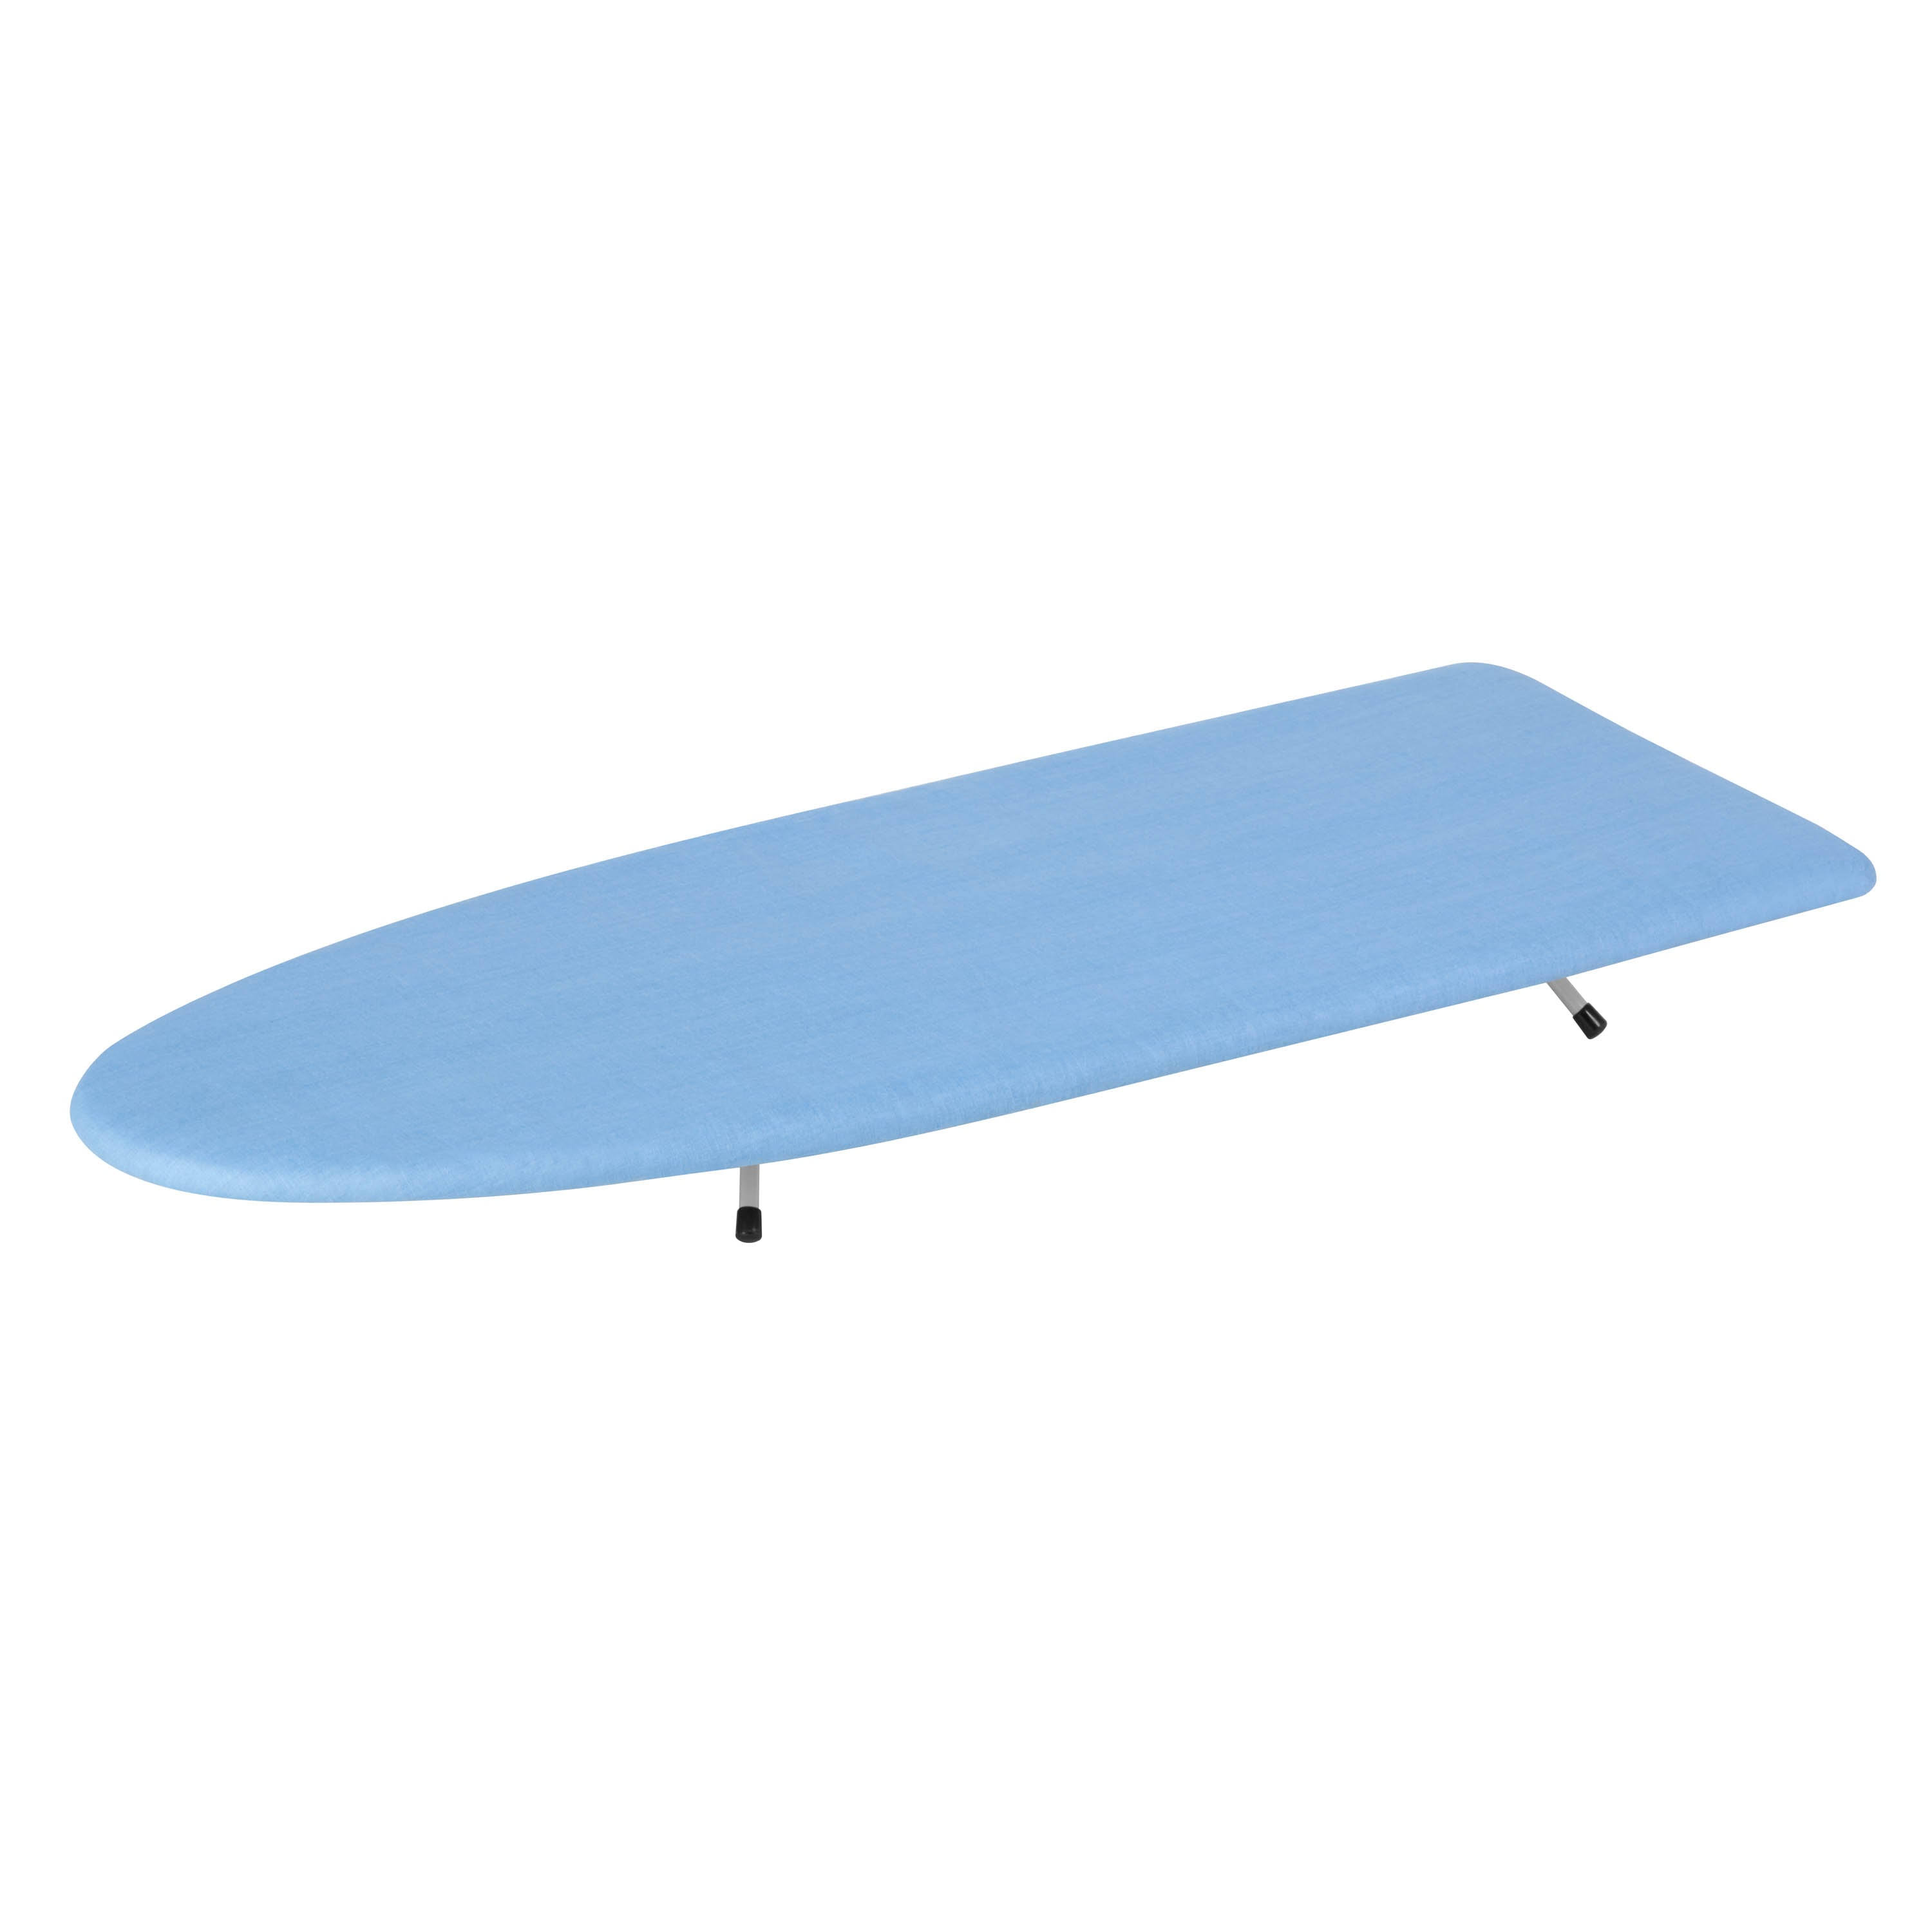 Table Top Ironing Board - Blue